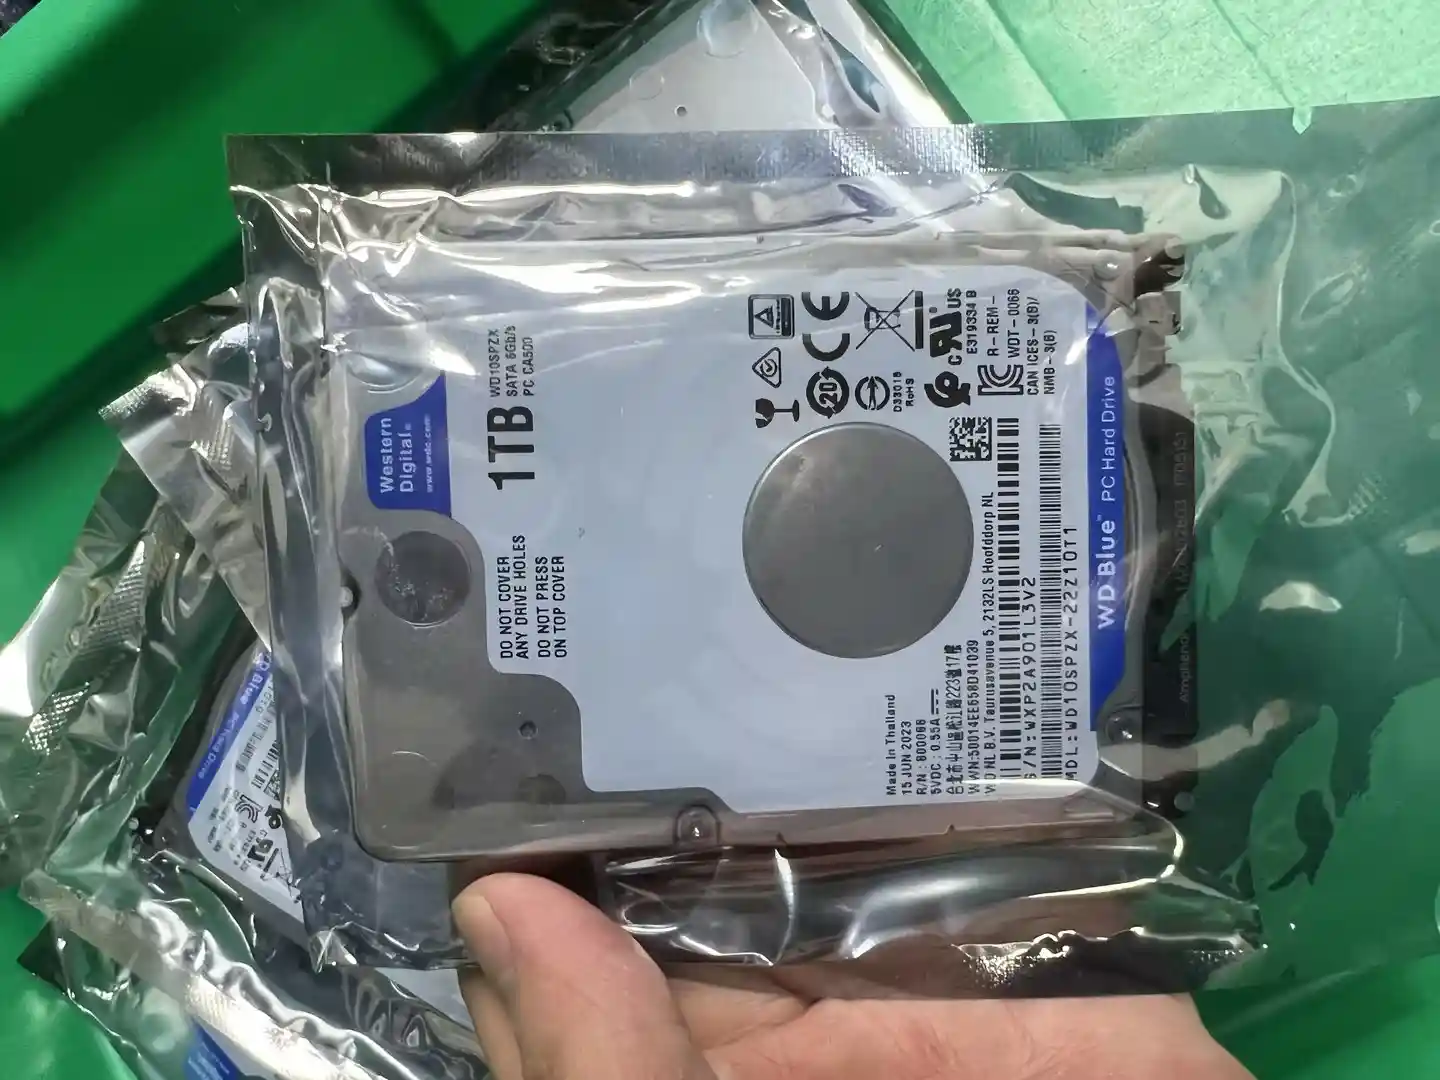 WD & seagate HDD